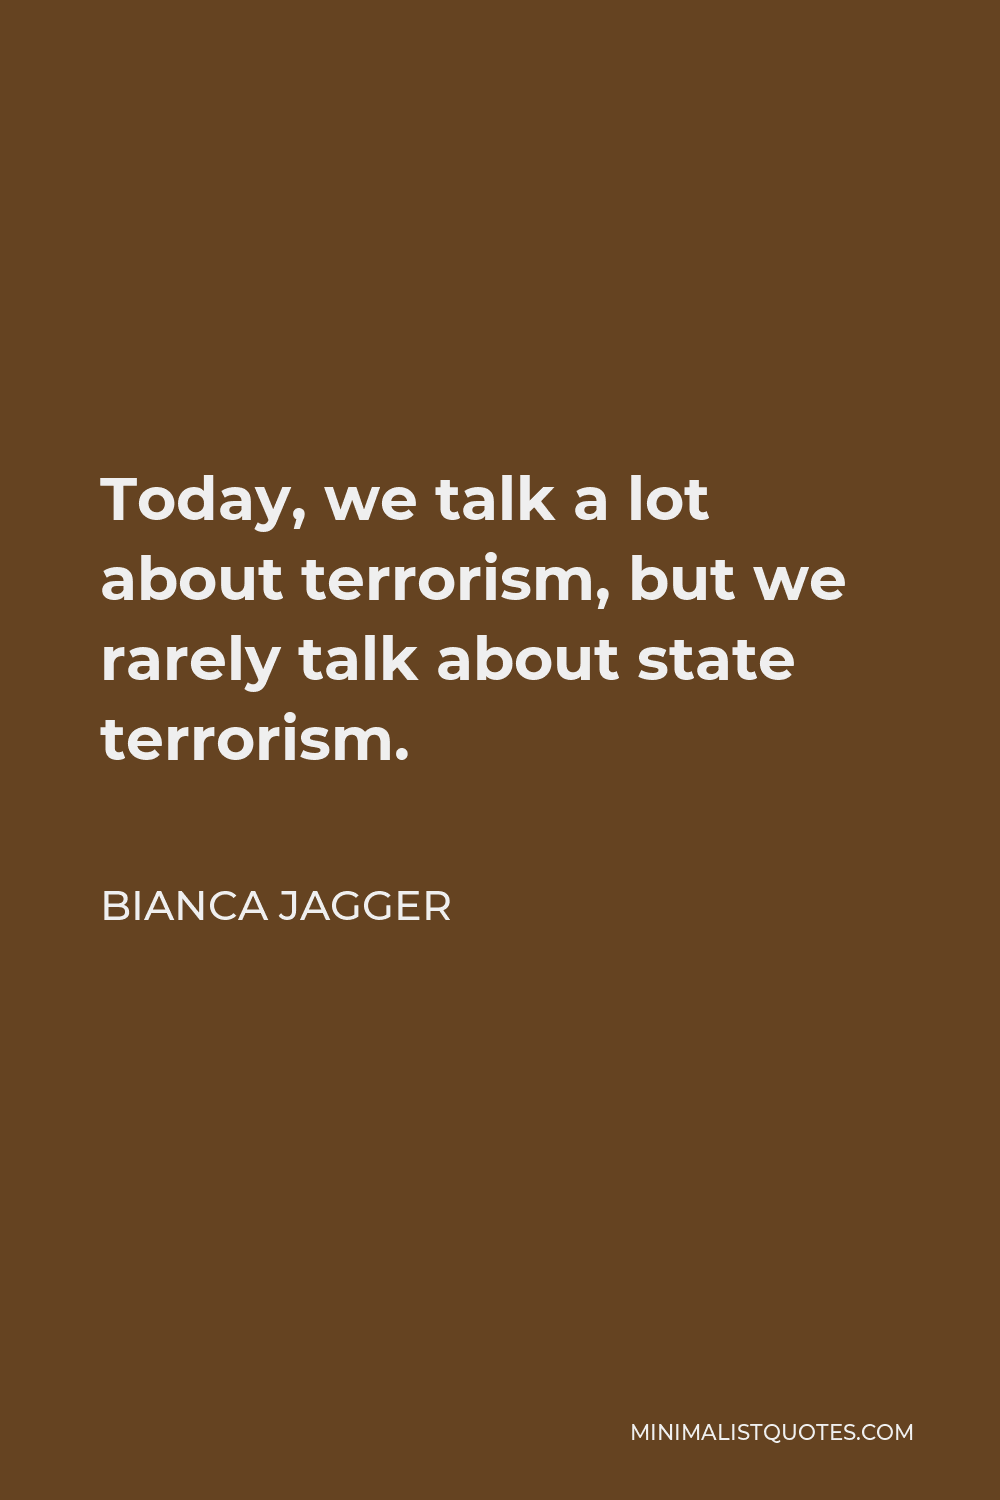 Bianca Jagger Quote - Today, we talk a lot about terrorism, but we rarely talk about state terrorism.